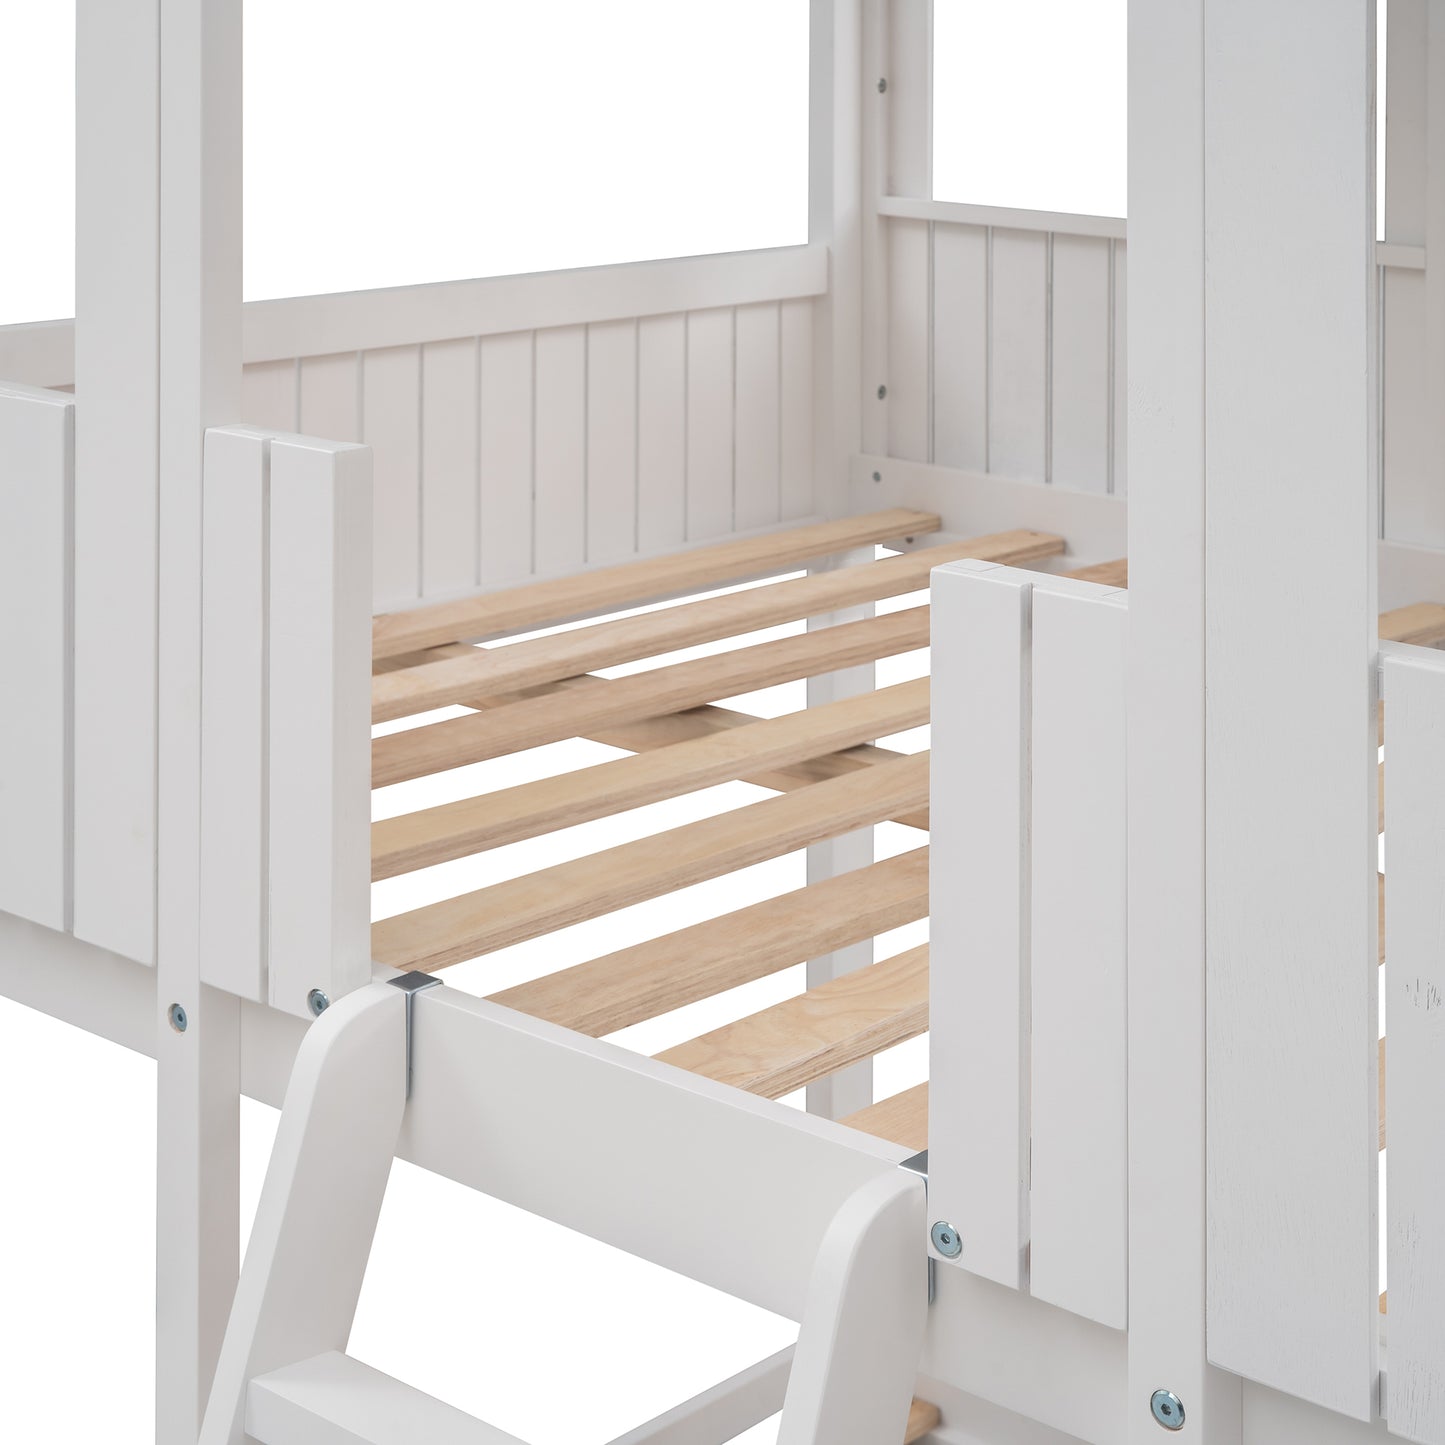 White Full Over Full Wood Bunk Bed with Playful Playhouse Design